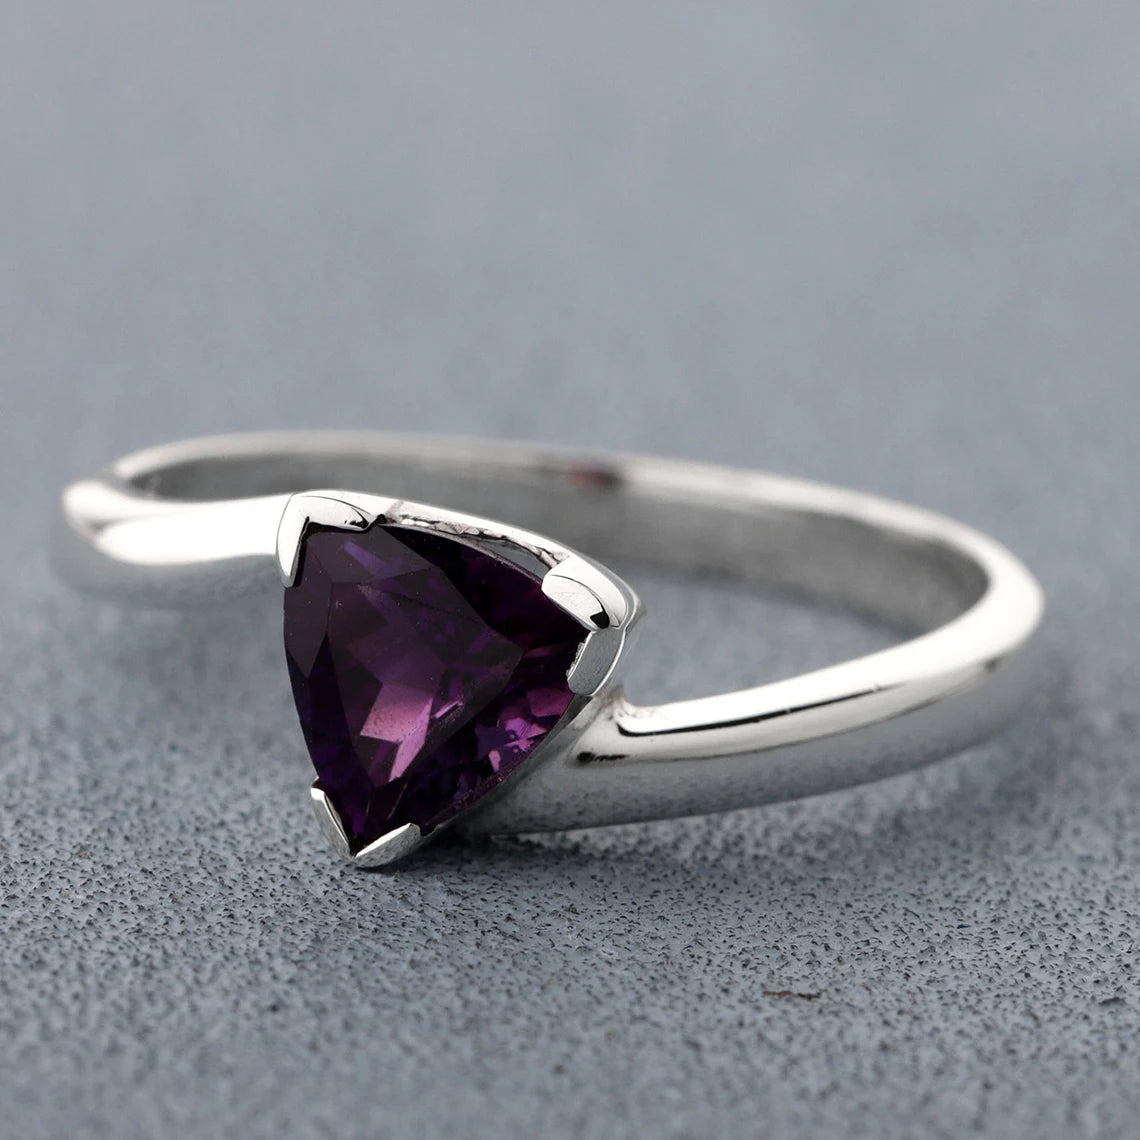 Trillion Amethyst Silver Ring | Sterling Silver Ring| Amethyst Ring Silver | Amethyst Jewelry| Trillion Gemstone Ring | Dainty Stacking Ring